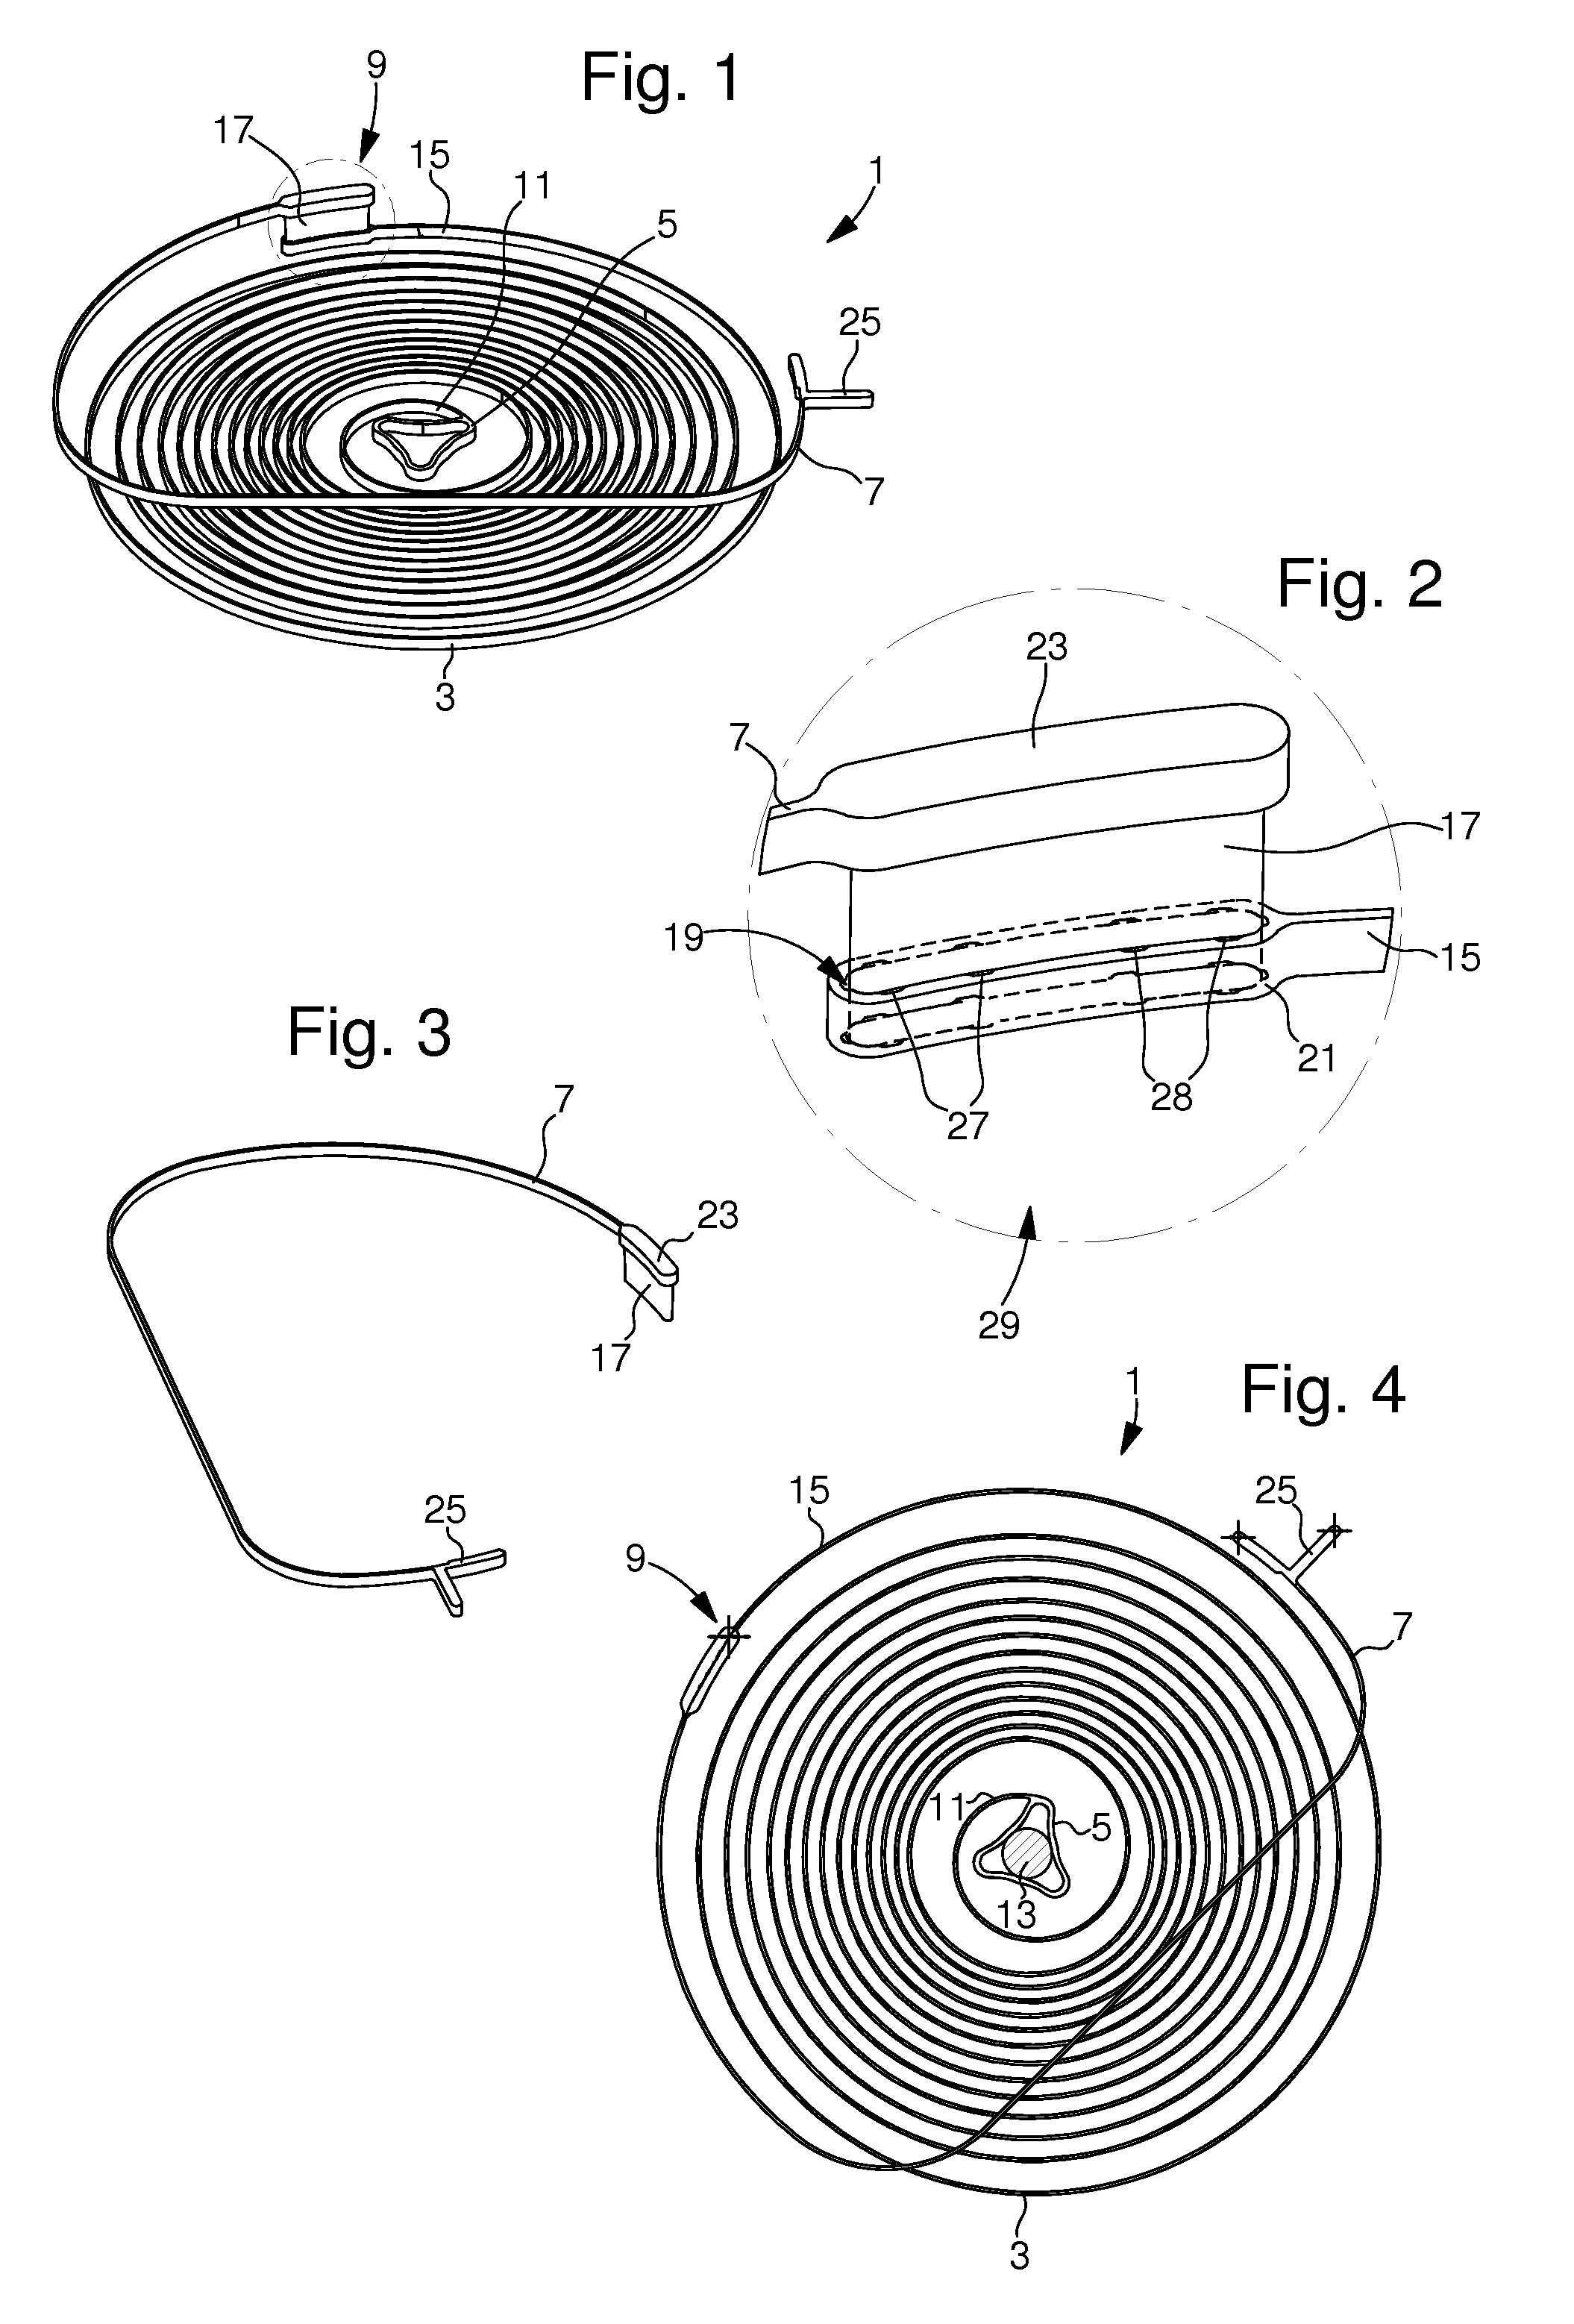 Breguet overcoil balance spring made of silicon-based material